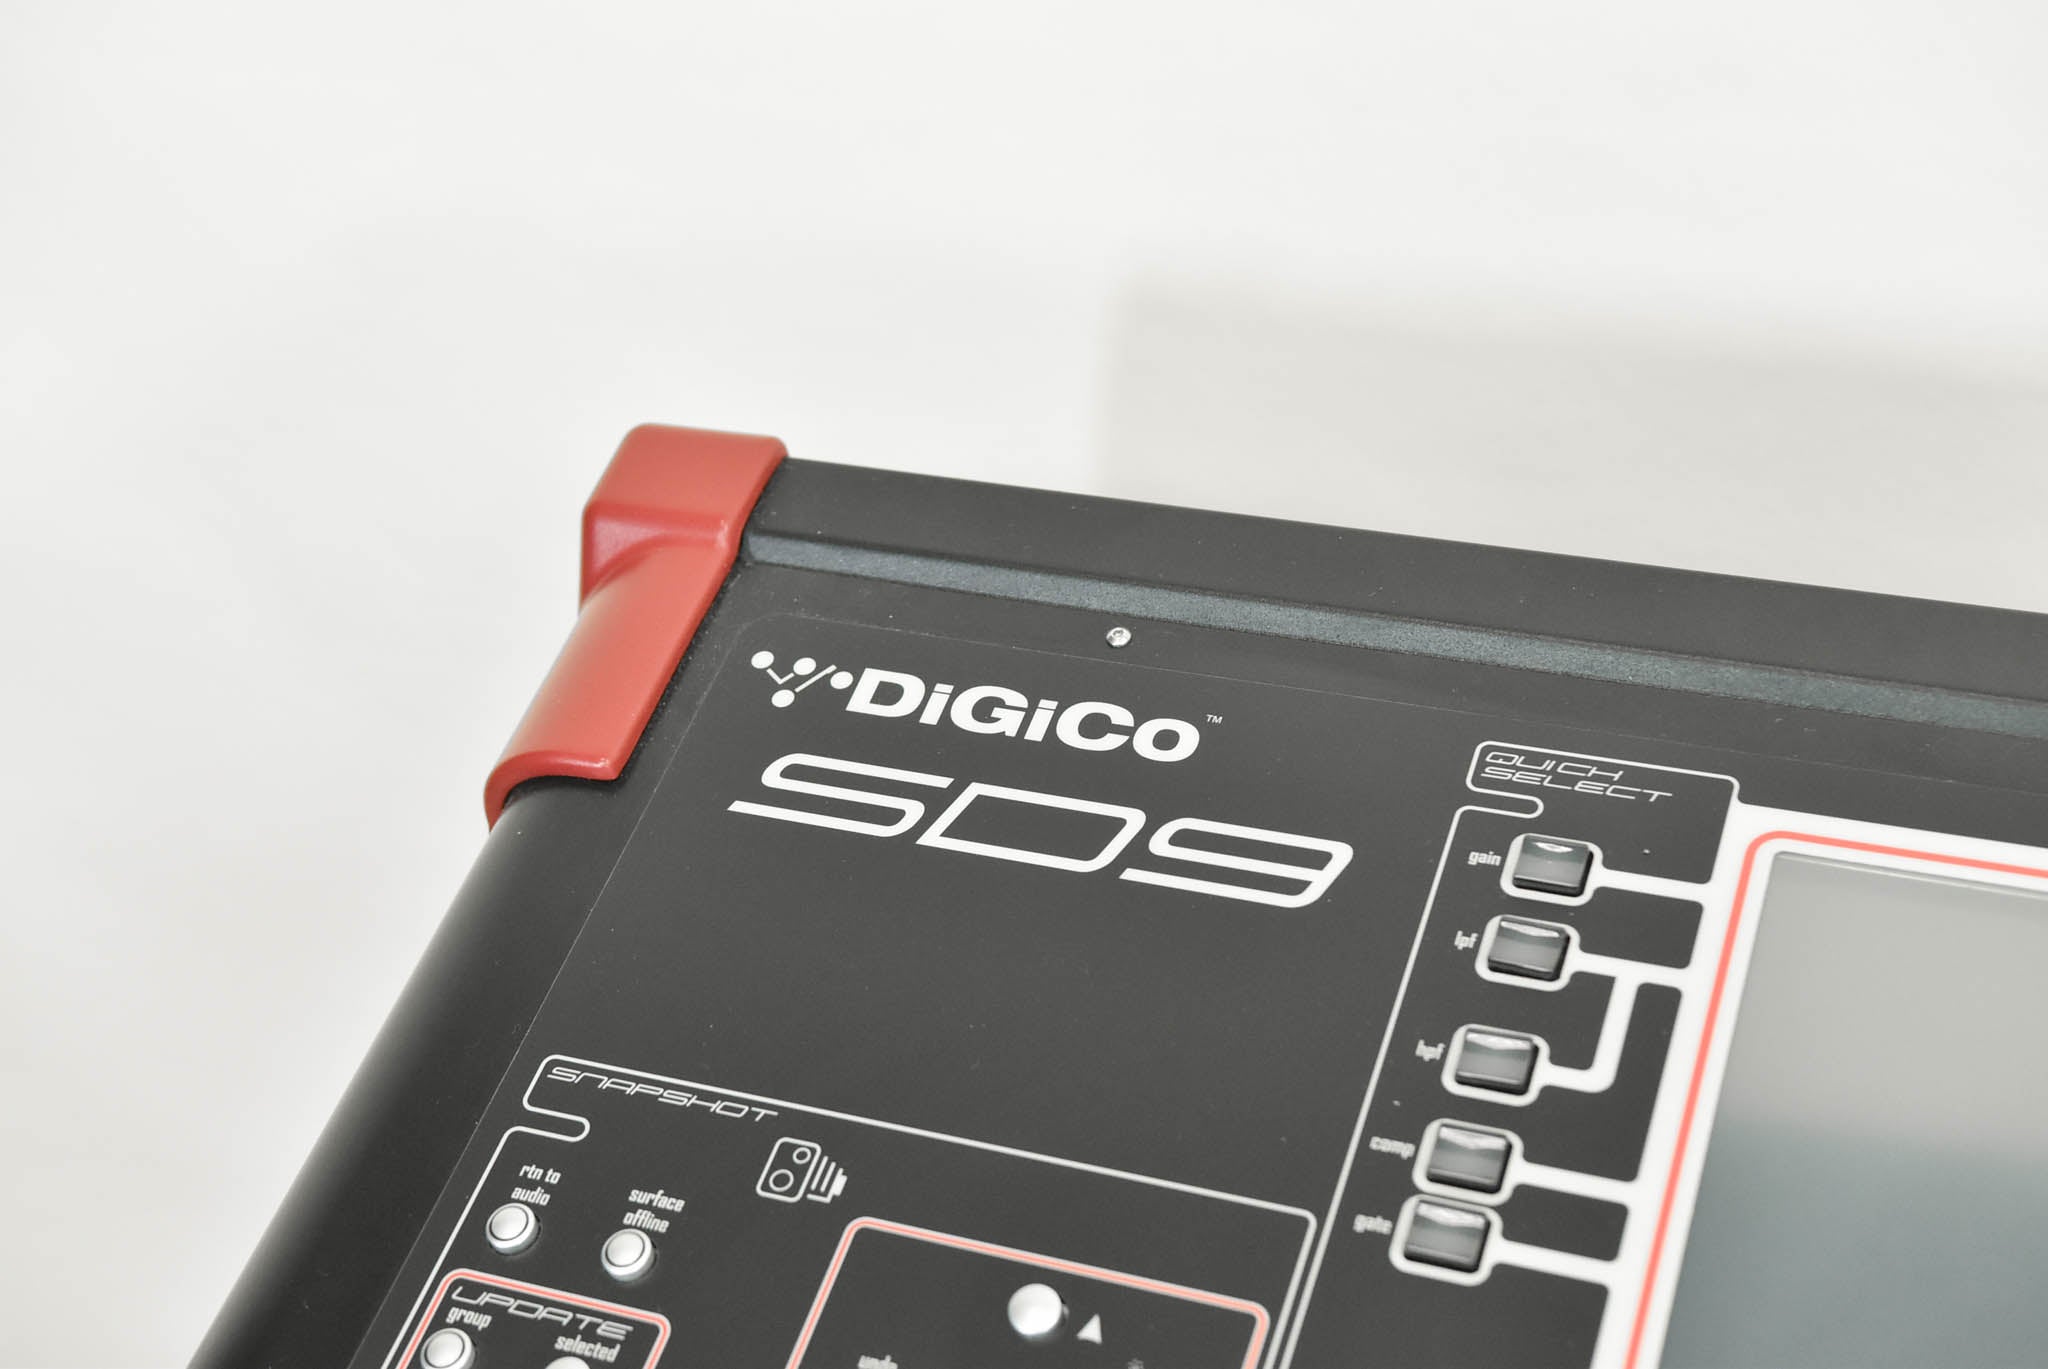 DiGiCo SD9 Digital Mixing Console with two D-Racks